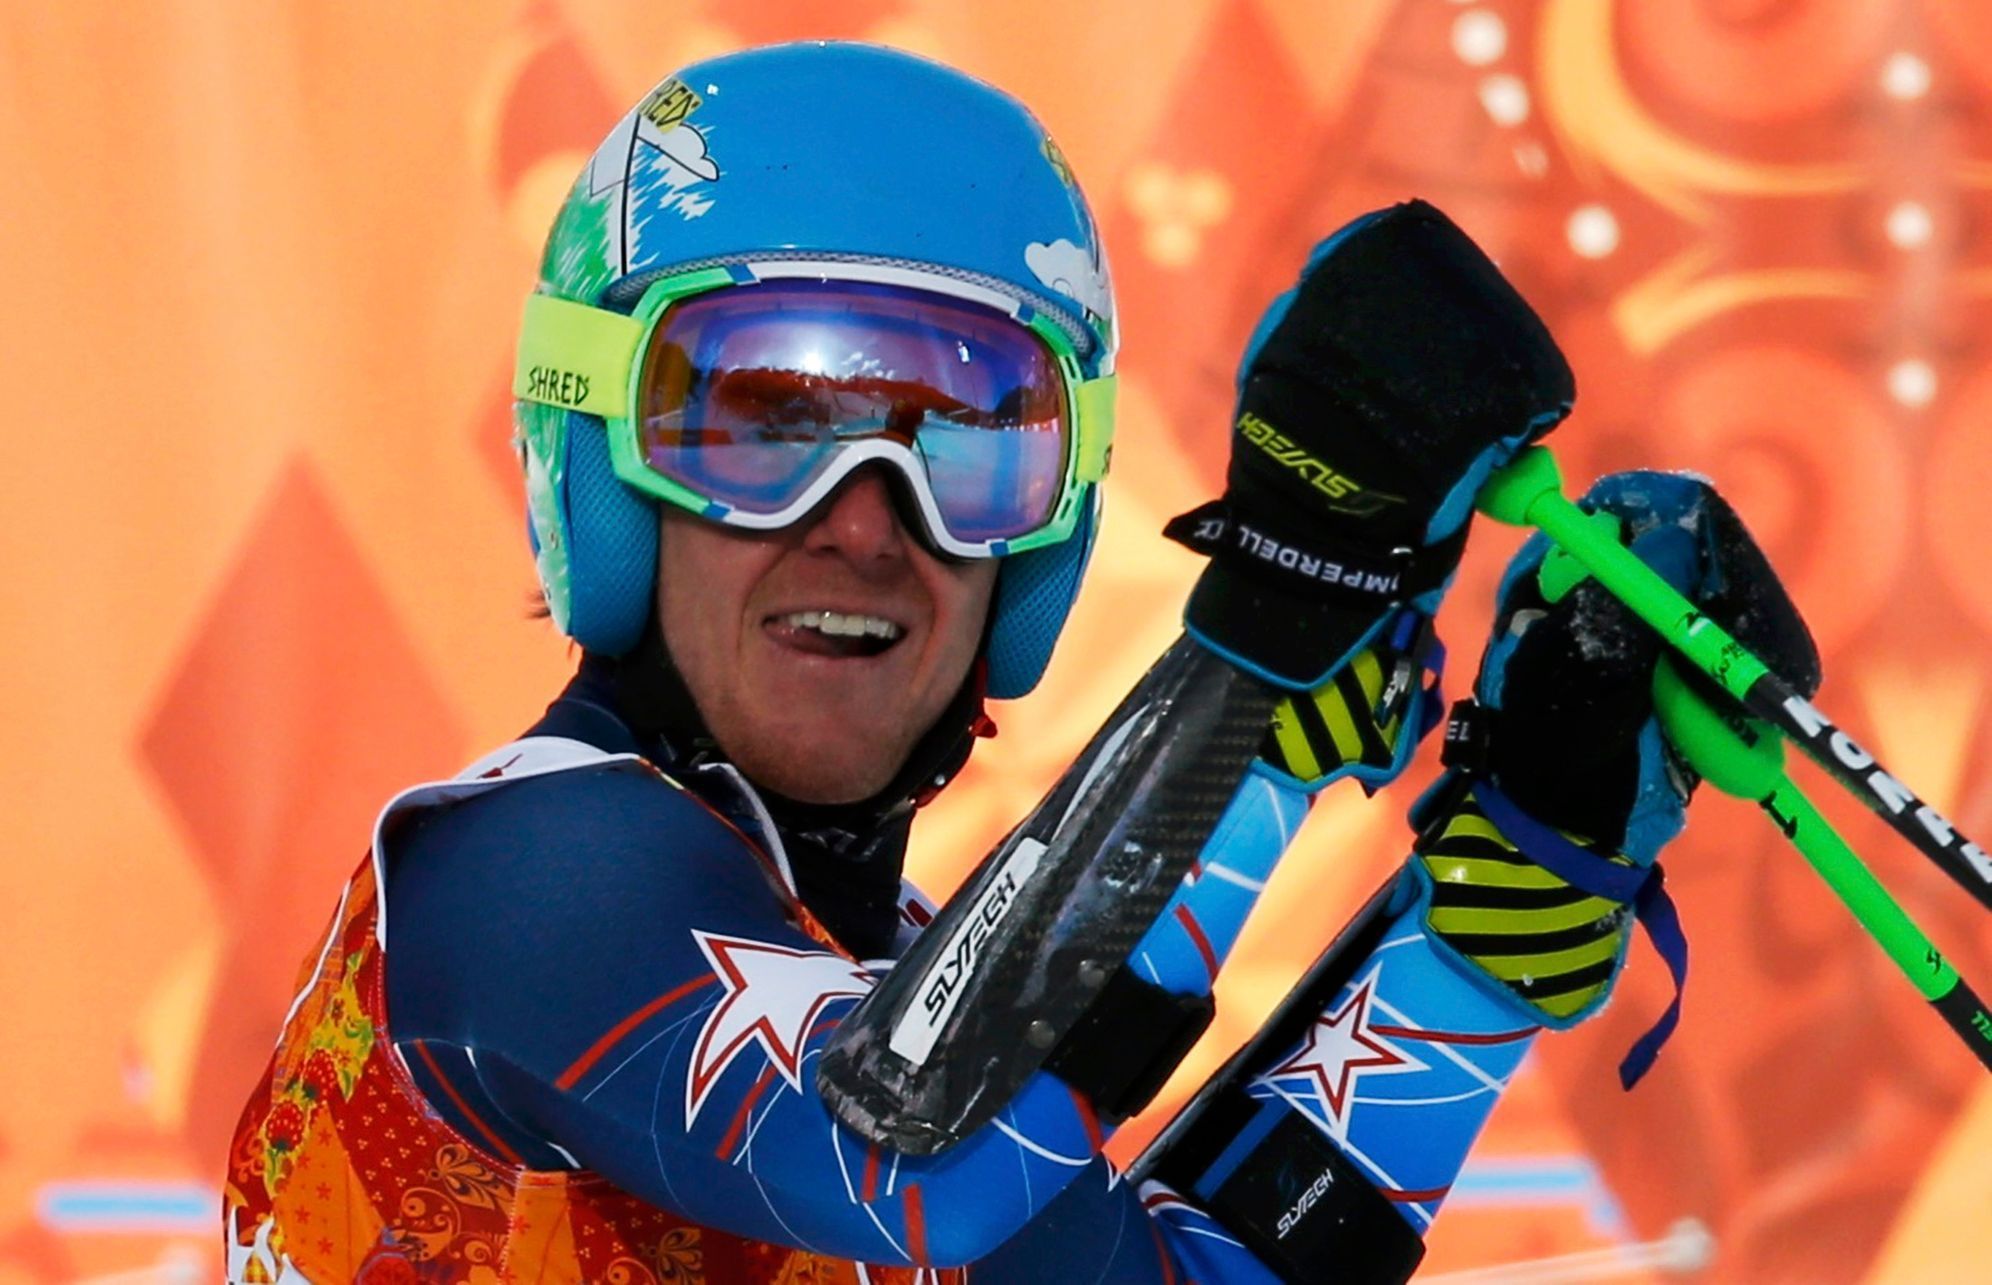 Ligety of the U.S. smiles after the second run of the men's alpine skiing giant slalom event at the 2014 Sochi Winter Olympics